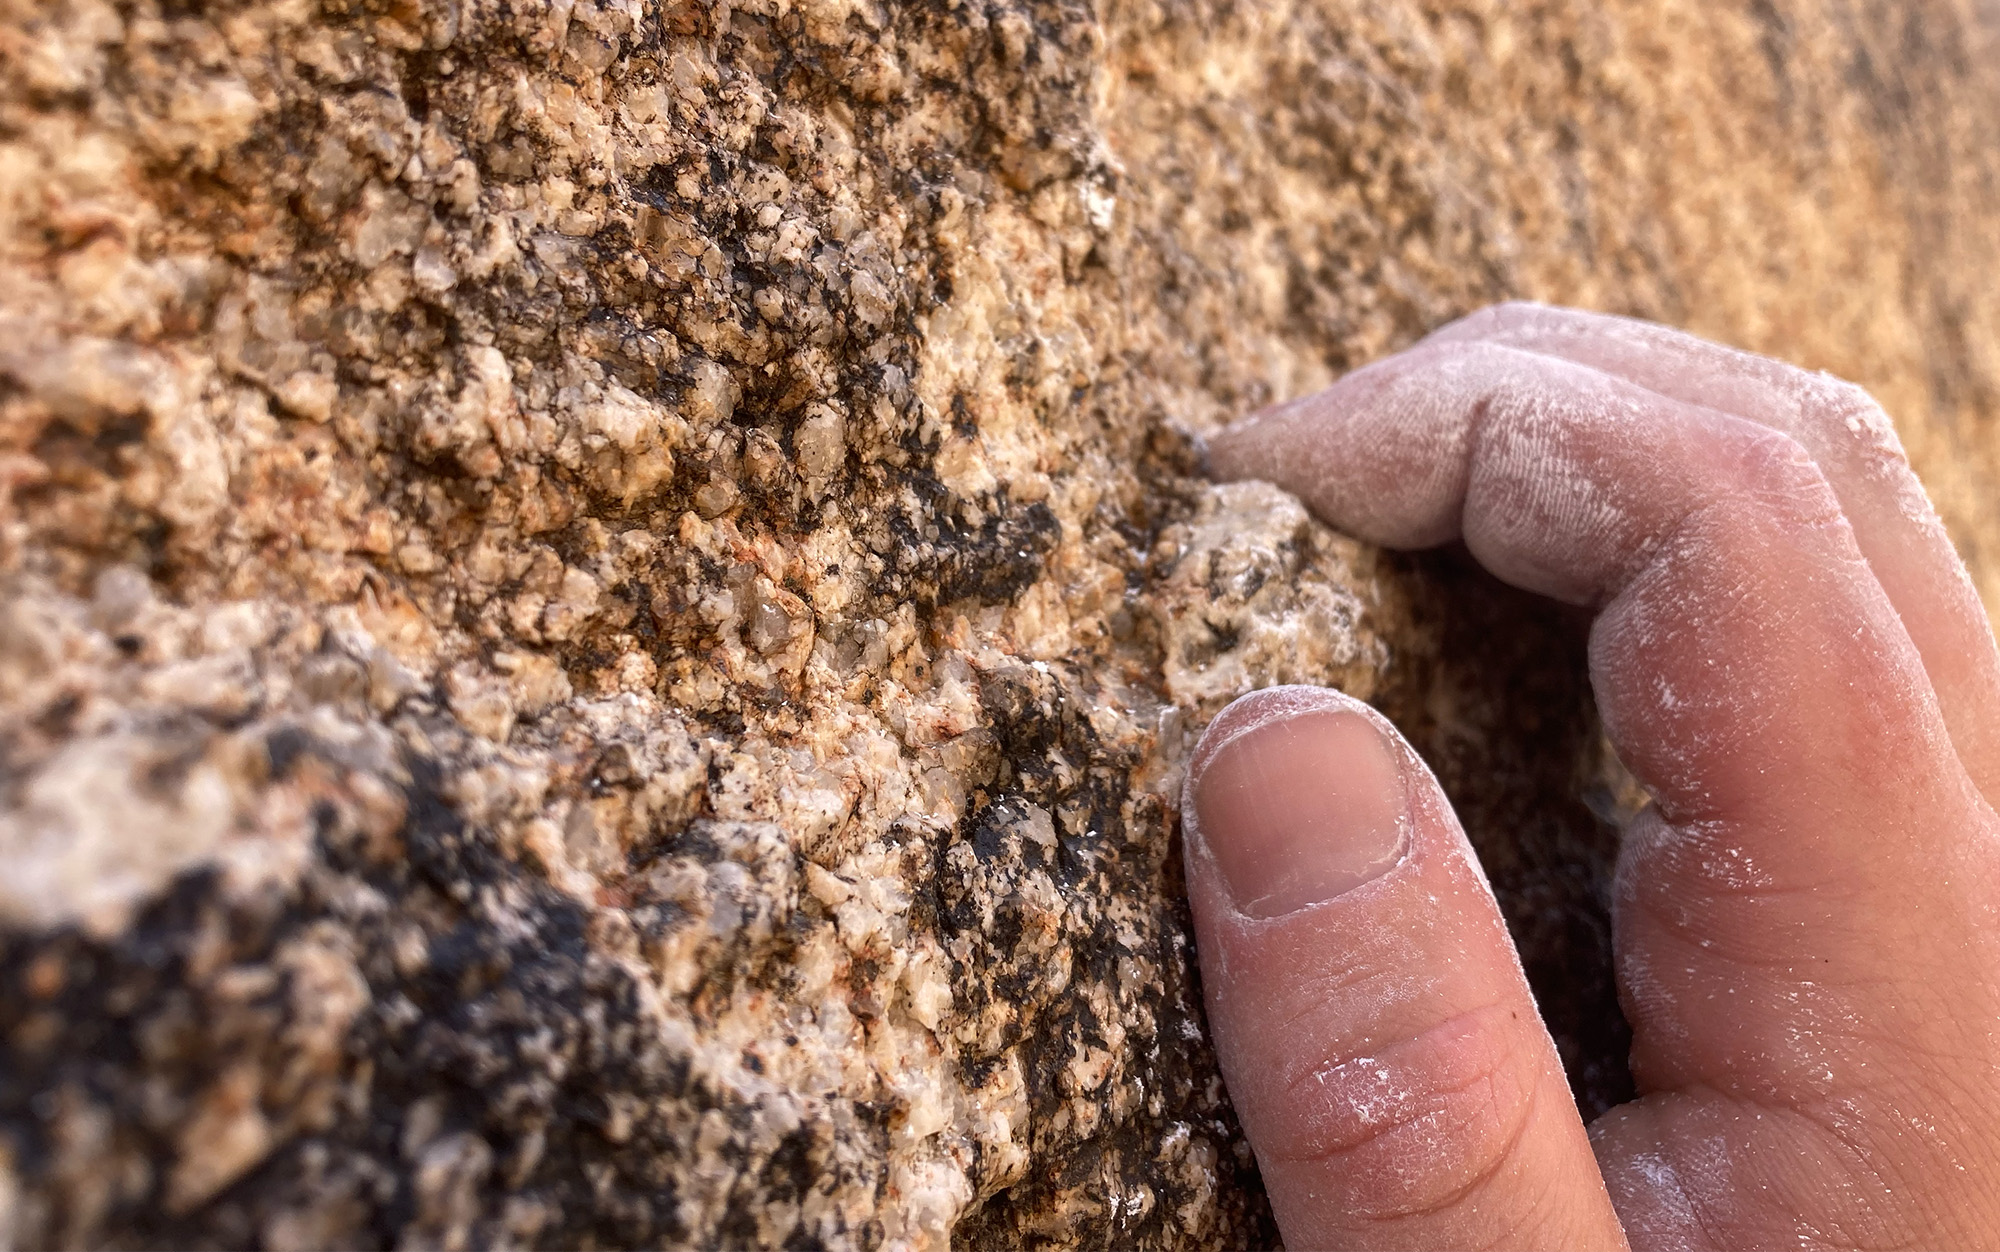 Climbed grips rock with chalk on his hands.